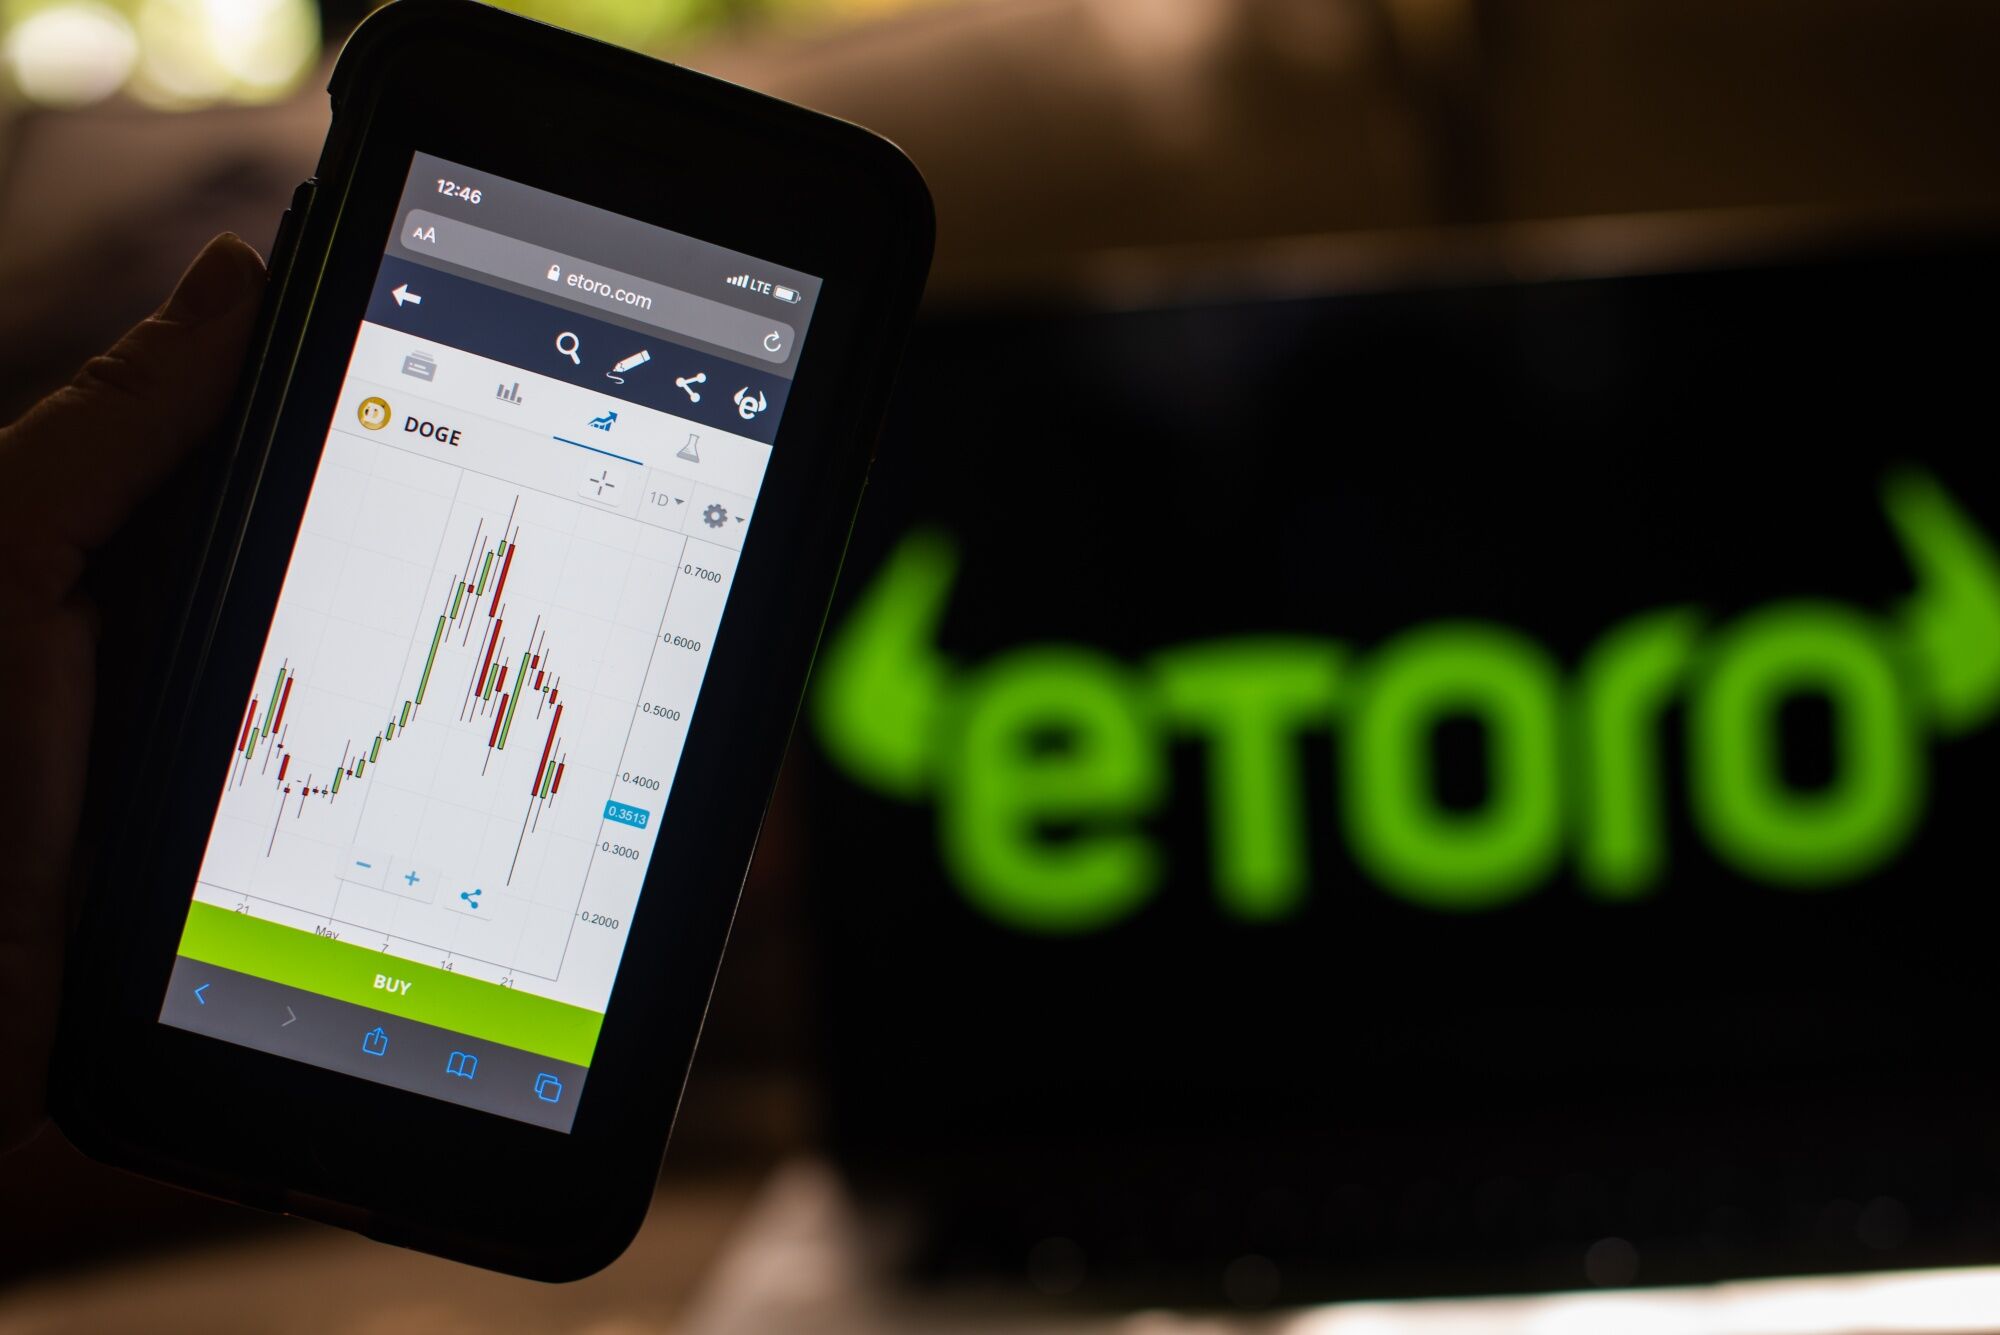 What is the impact of Apple's stock price on eToro, and how can investors adopt it?